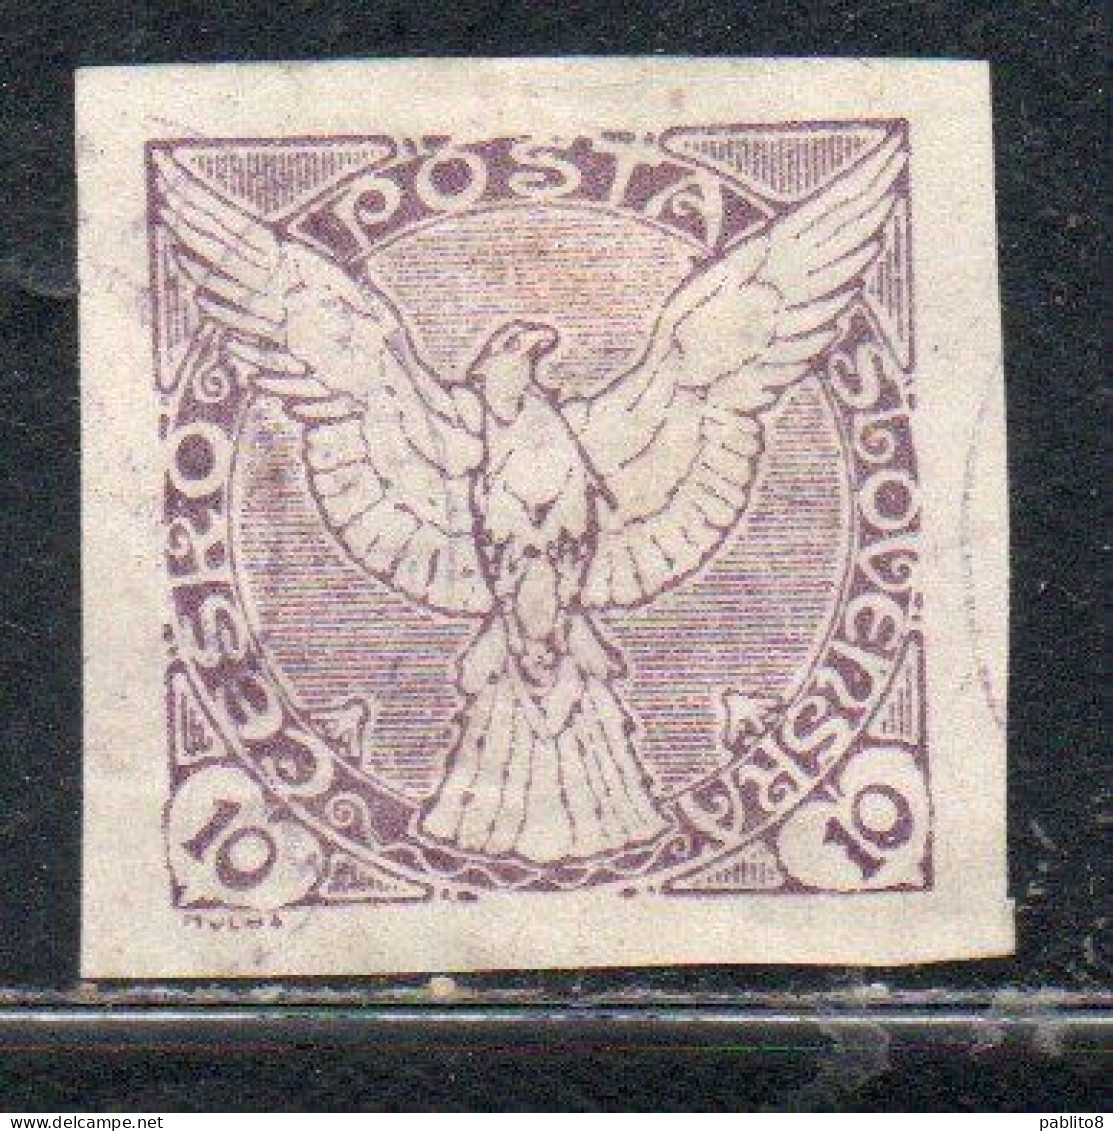 CZECHOSLOVAKIA CESKA CECOSLOVACCHIA 1918 1920 IMPERF. NEWSPAPER STAMPS WINDHOVER 10h MH - Newspaper Stamps